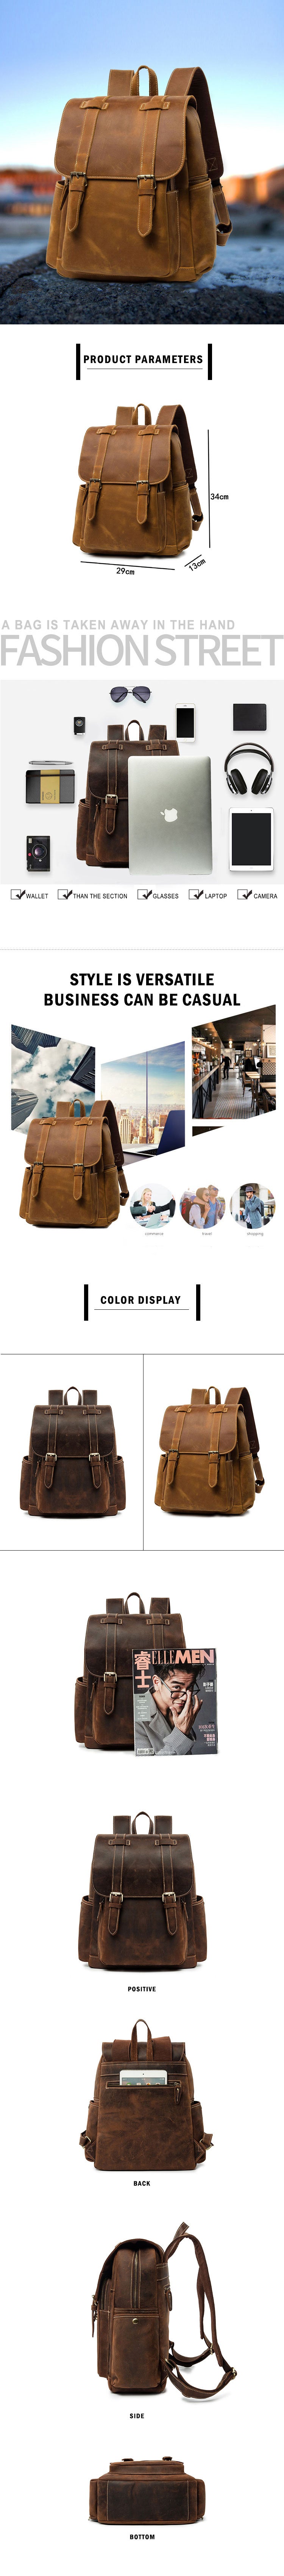 Product Display of Woosir Leather Backpack for College